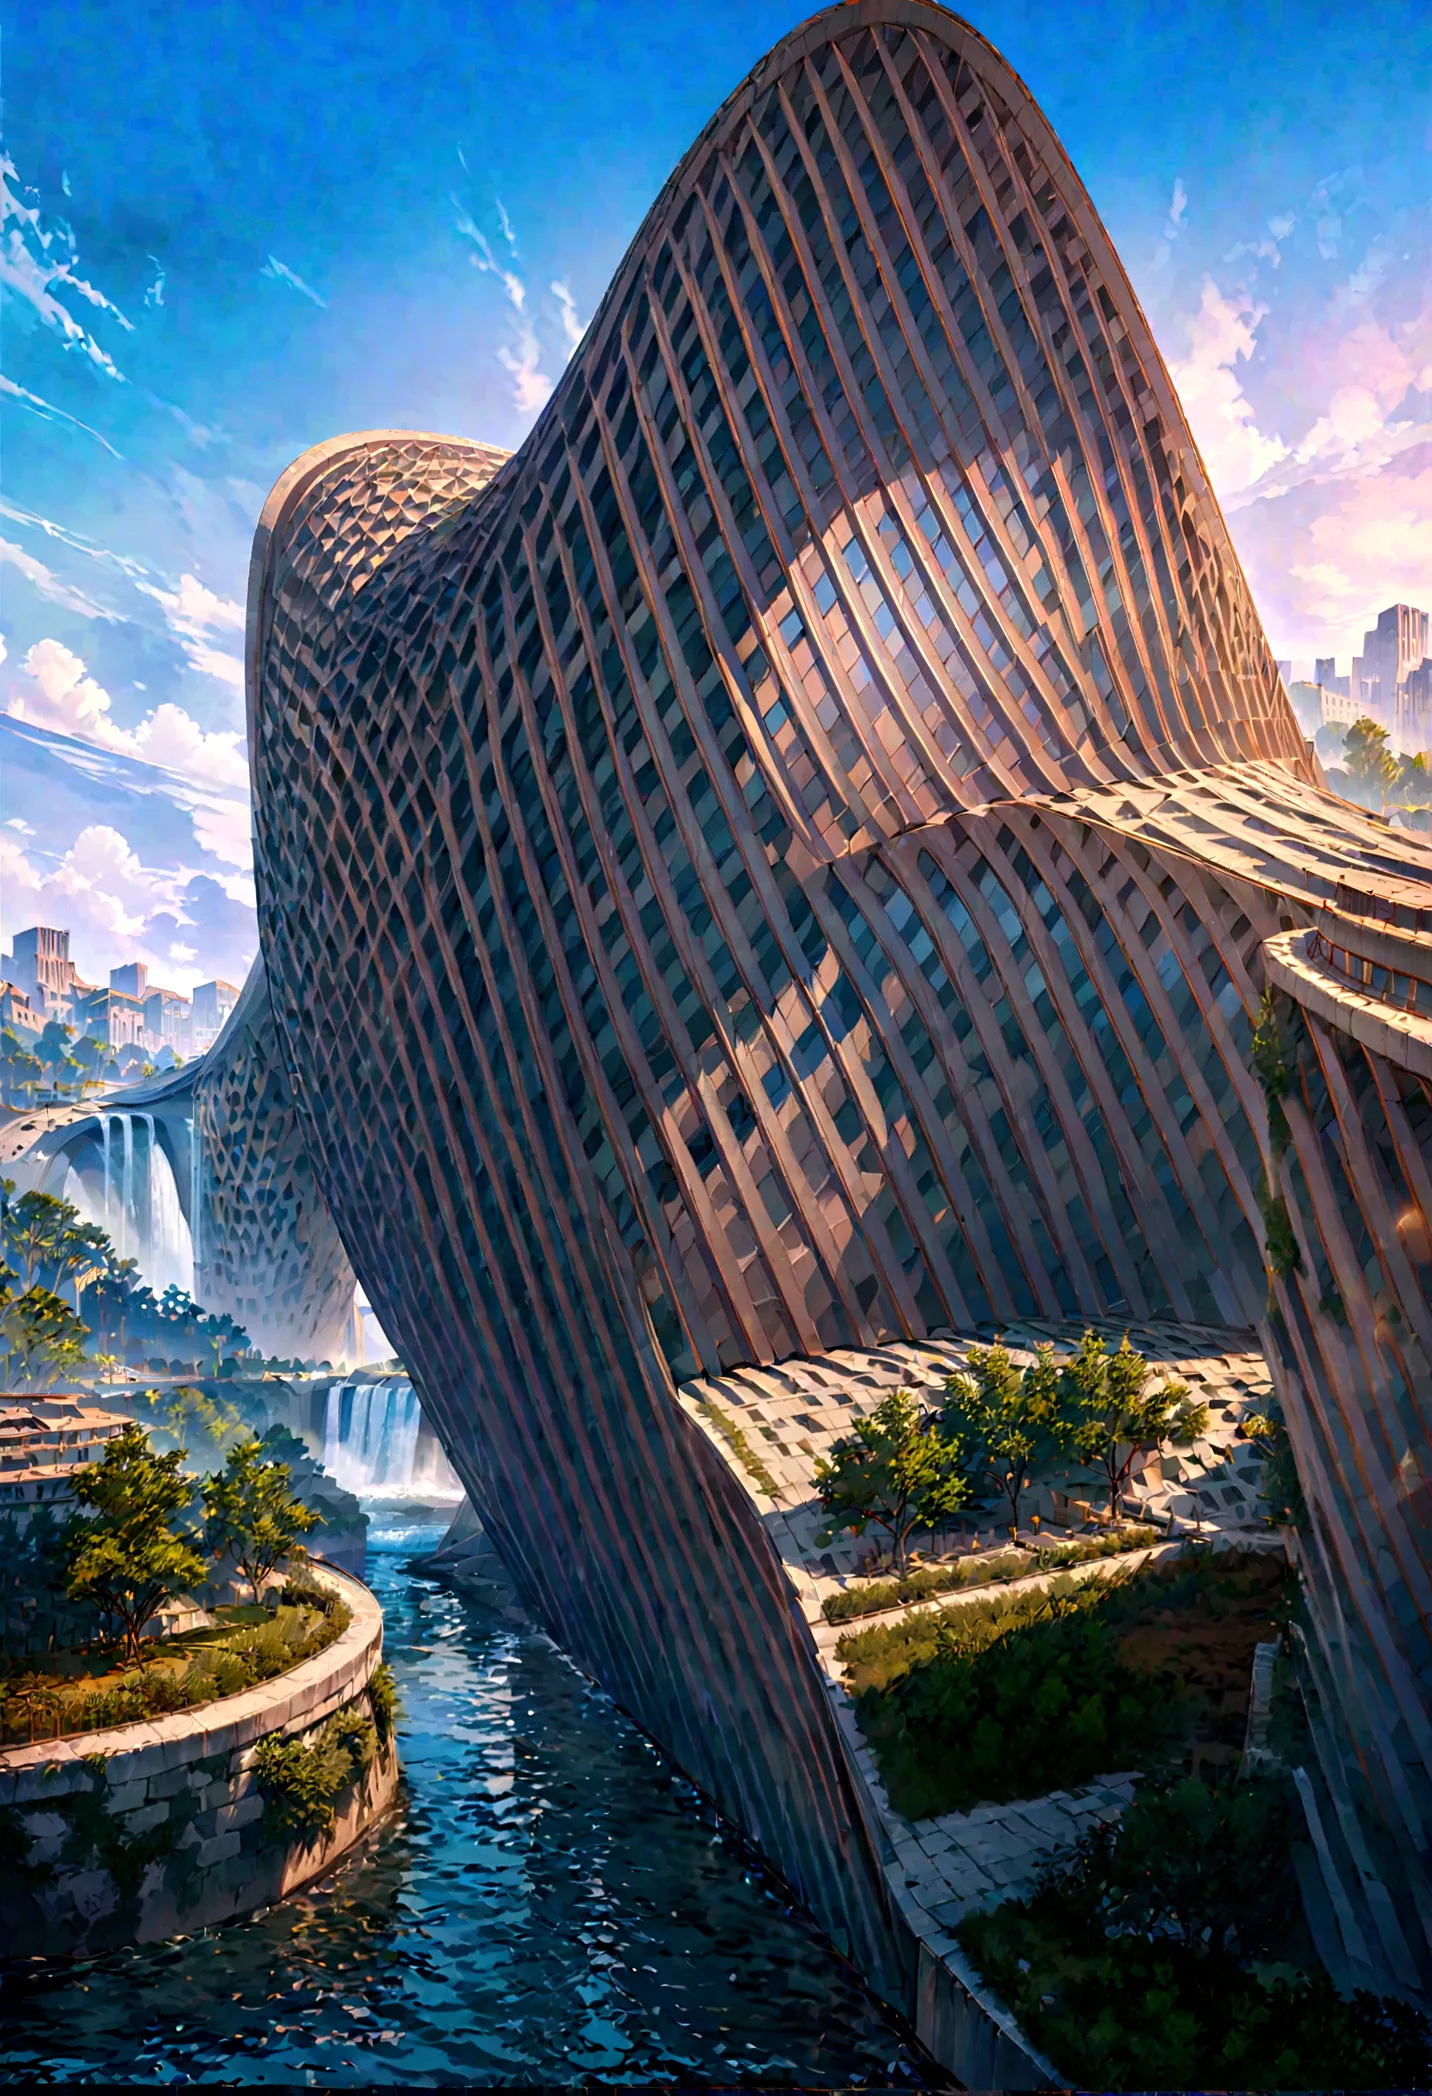 8K resolution, surreal, Super detailed, high quality, fantastical city, towering archways and bridges, cascading waterfalls, anc...